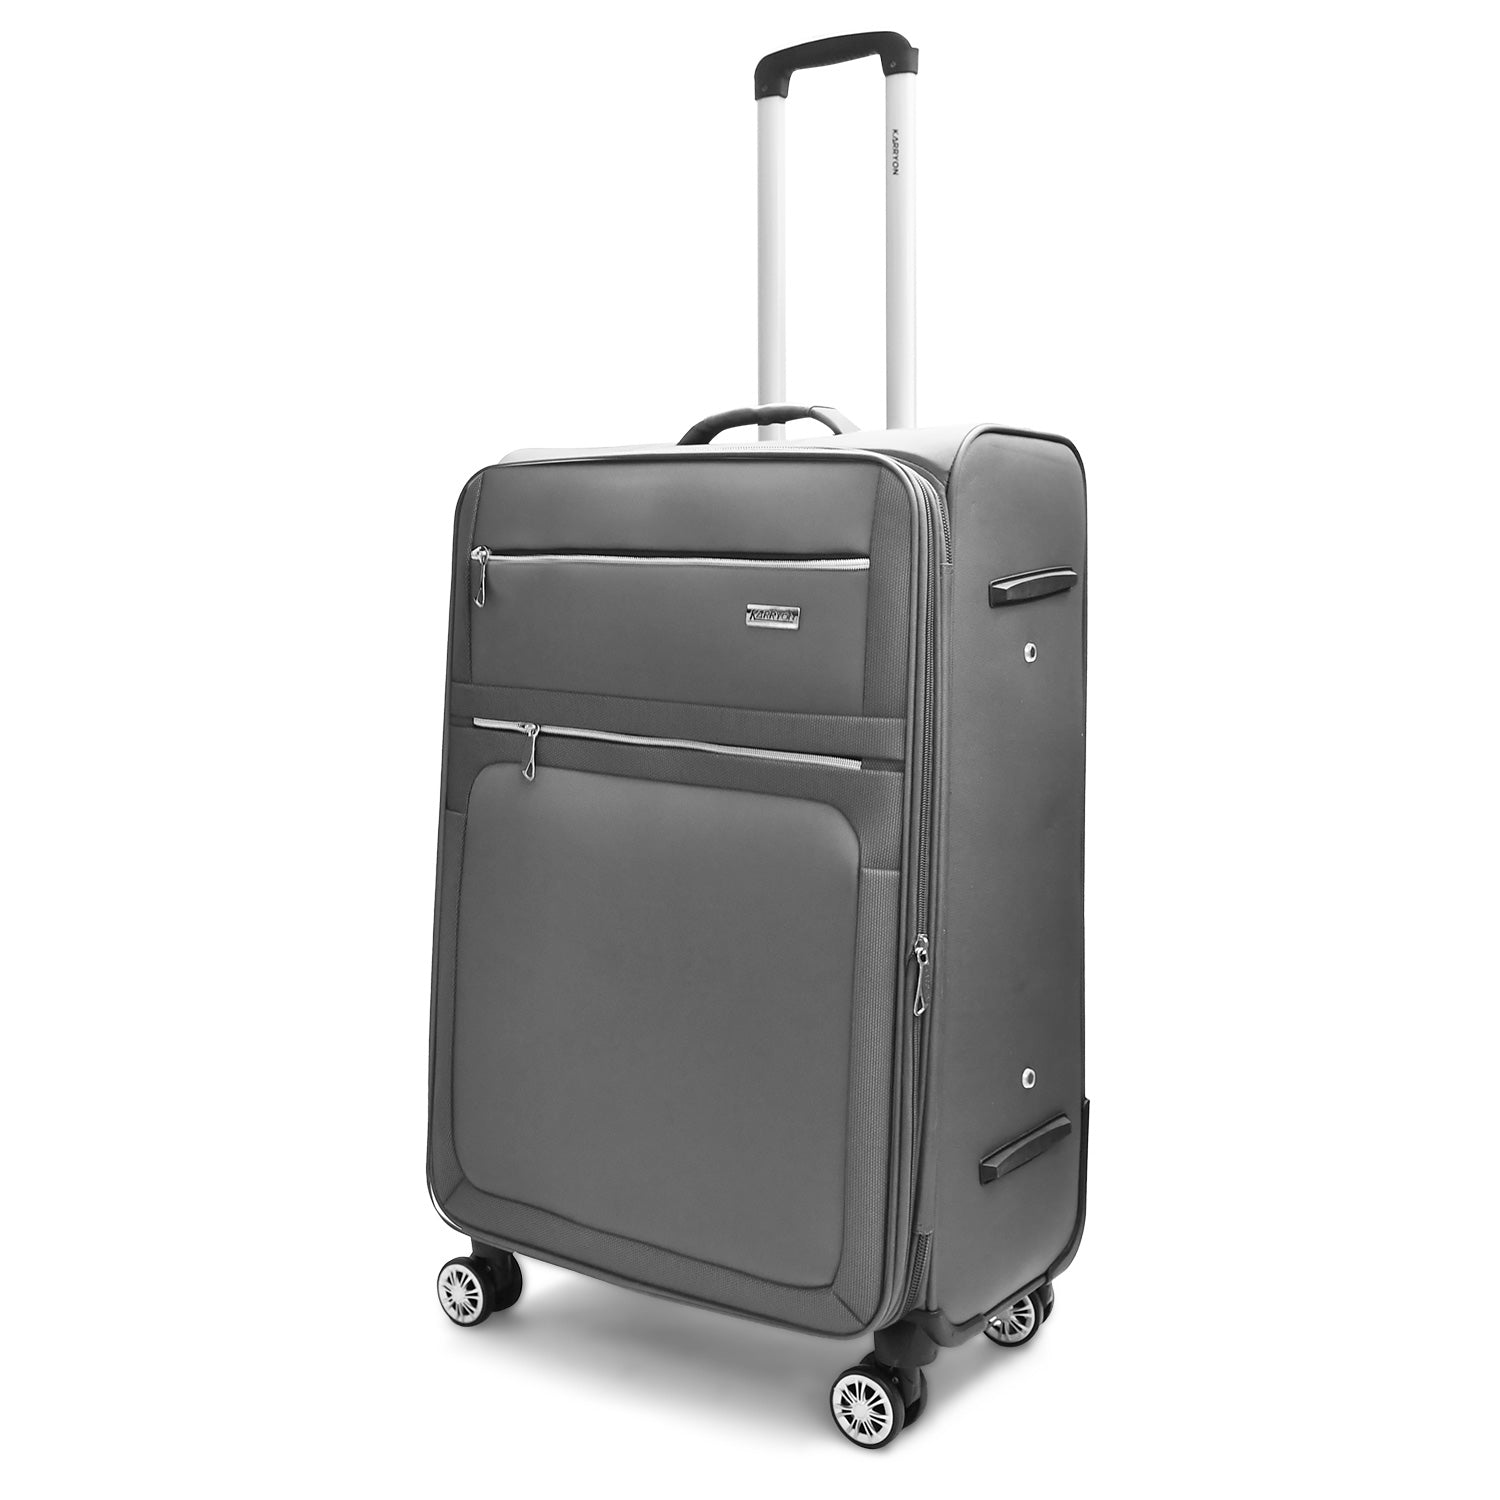 KARRY-ON AIREA DOUBLE WHEELED SOFT LUGGAGE